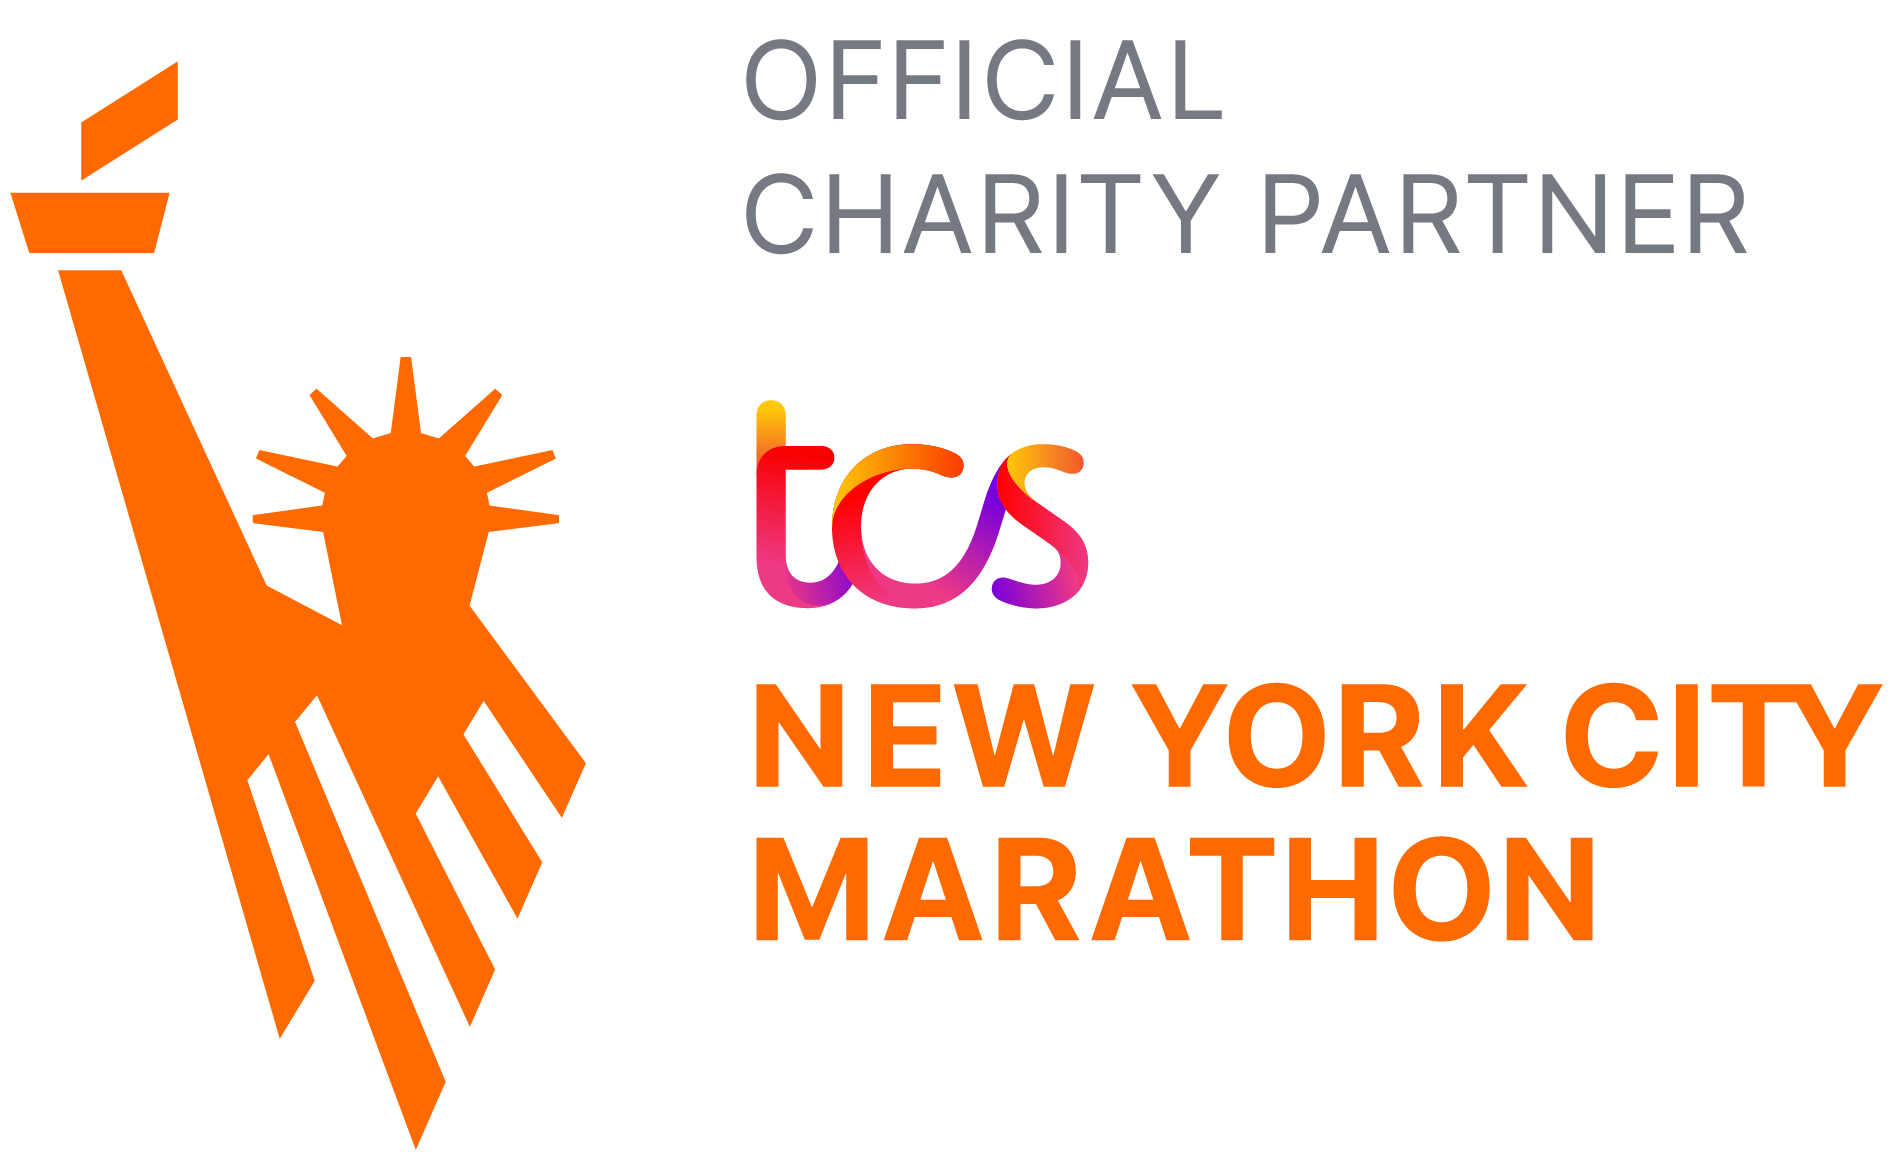 PAWS NY Named an Official Charity Partner of the 2023 TCS New York City Marathon